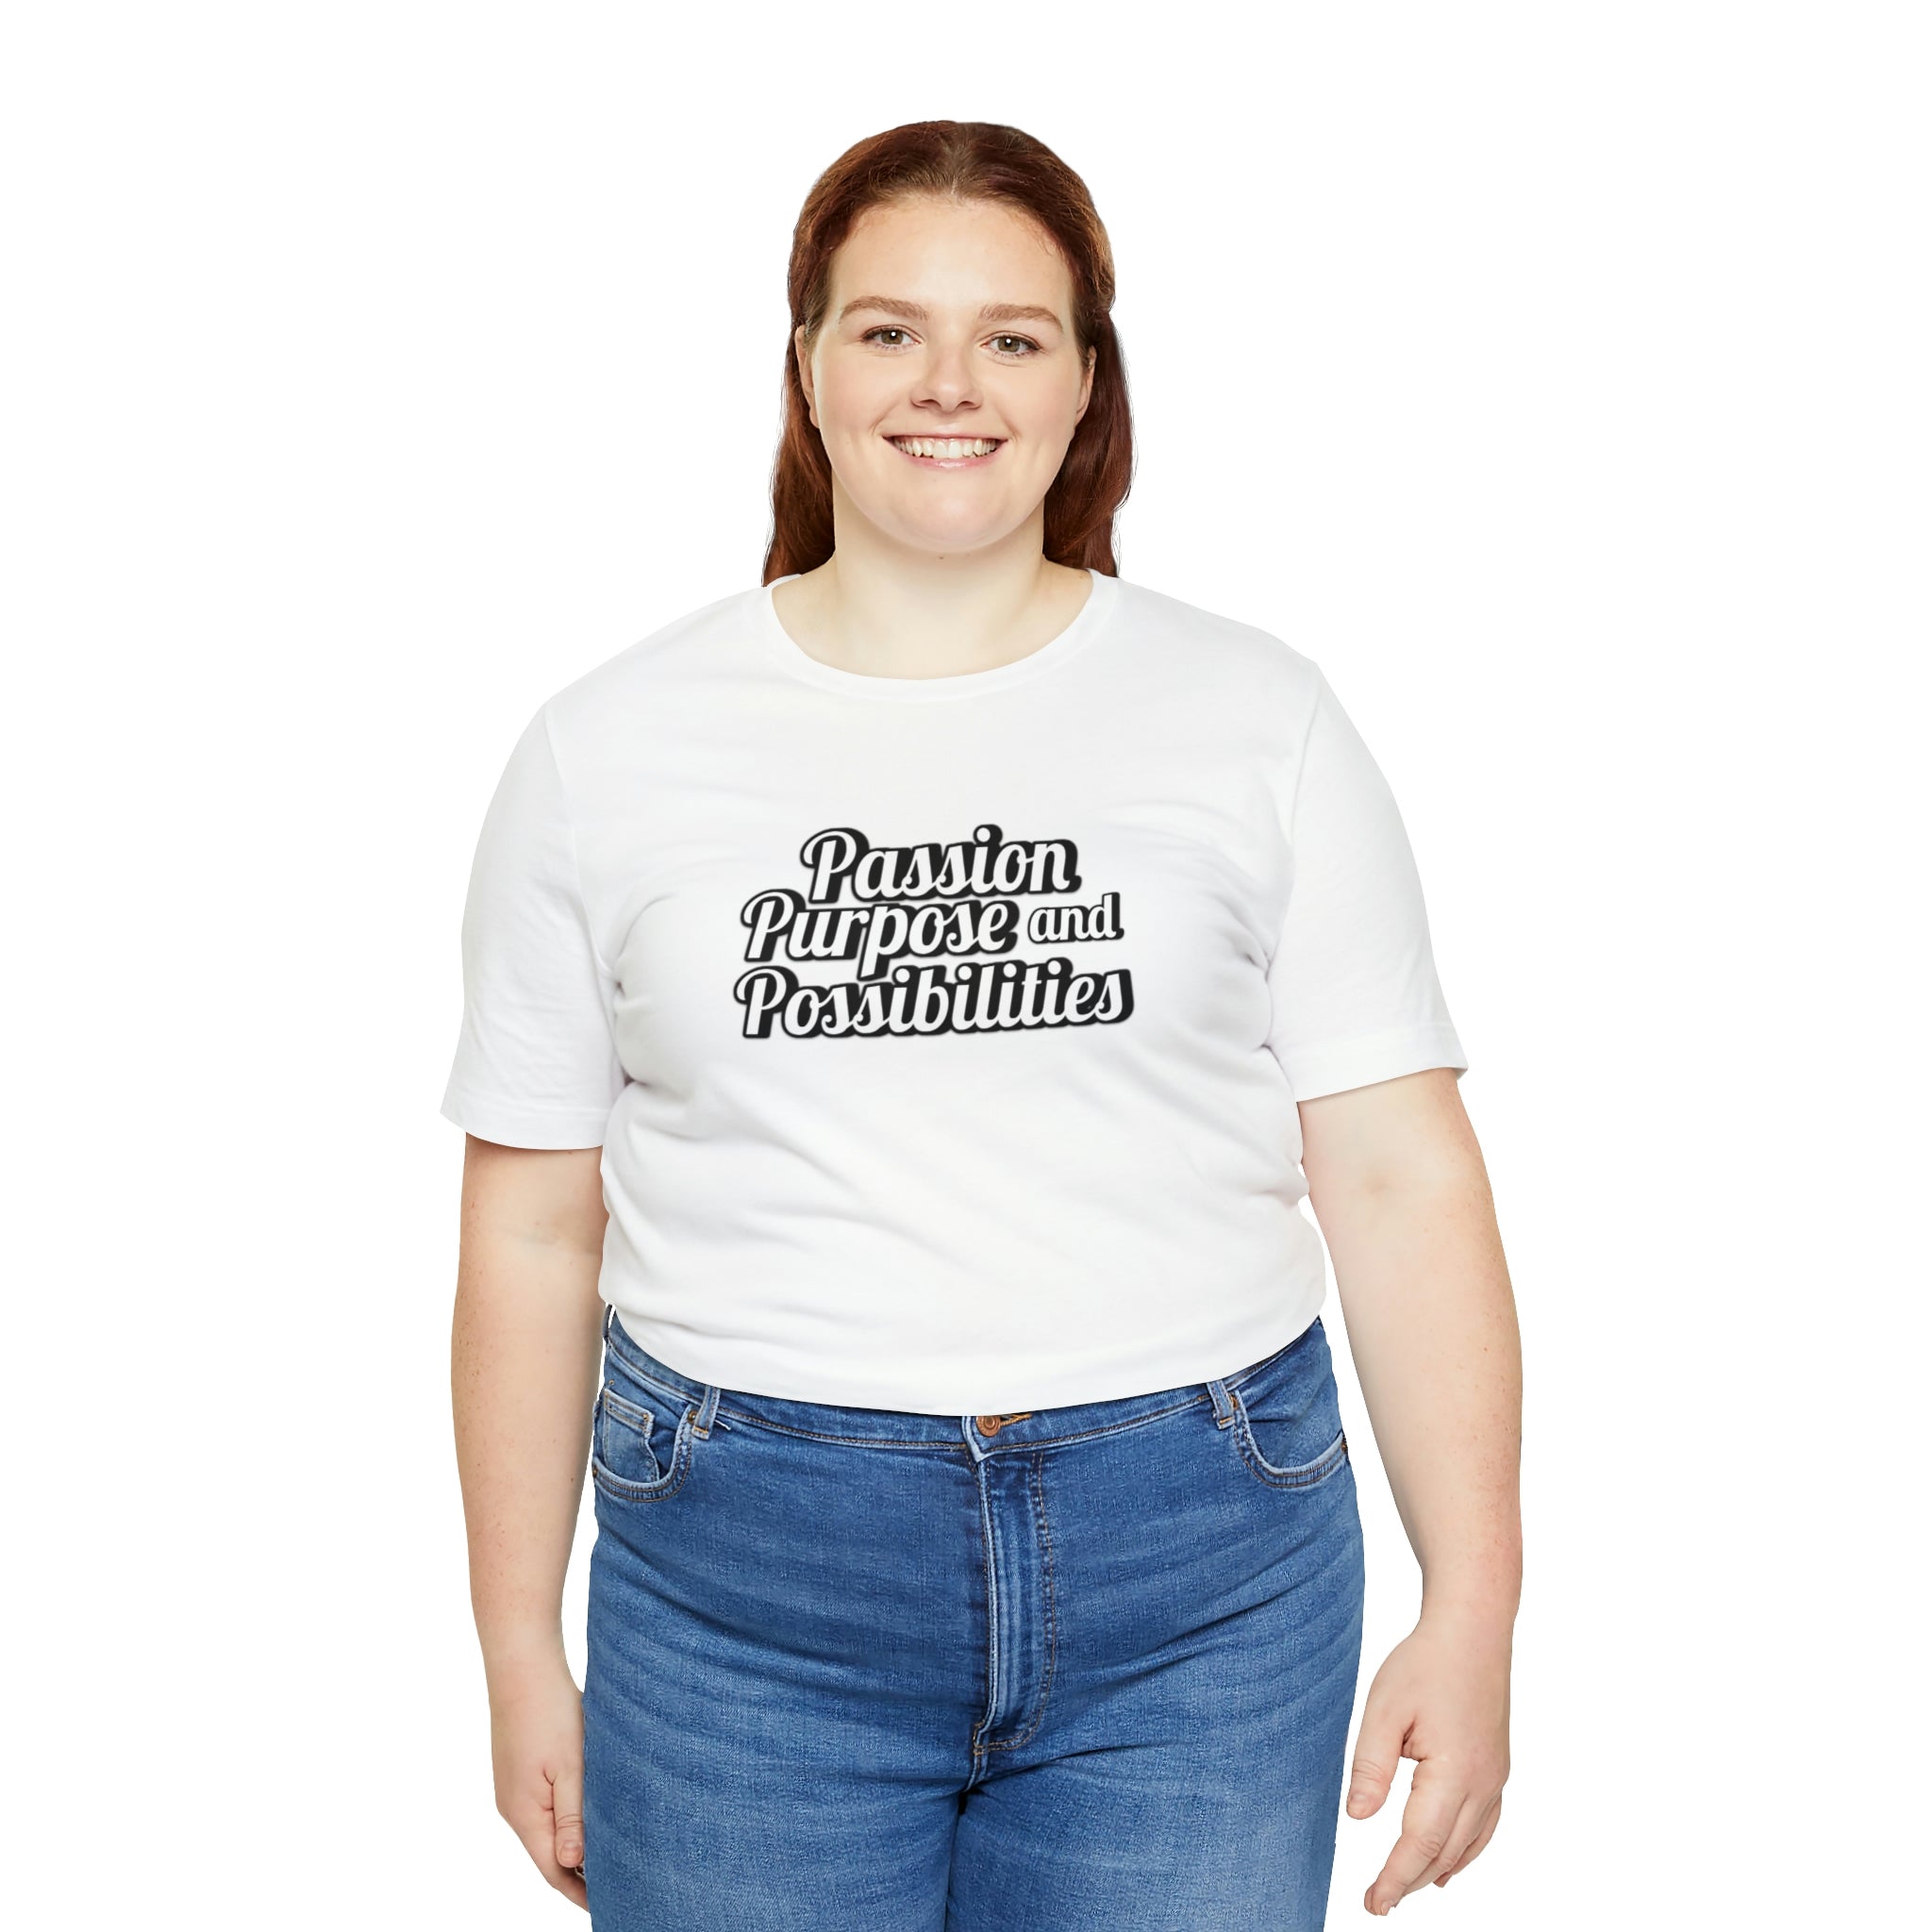 Passion Purpose and Possibilities Podcast Unisex Tee - The Kindness Cause